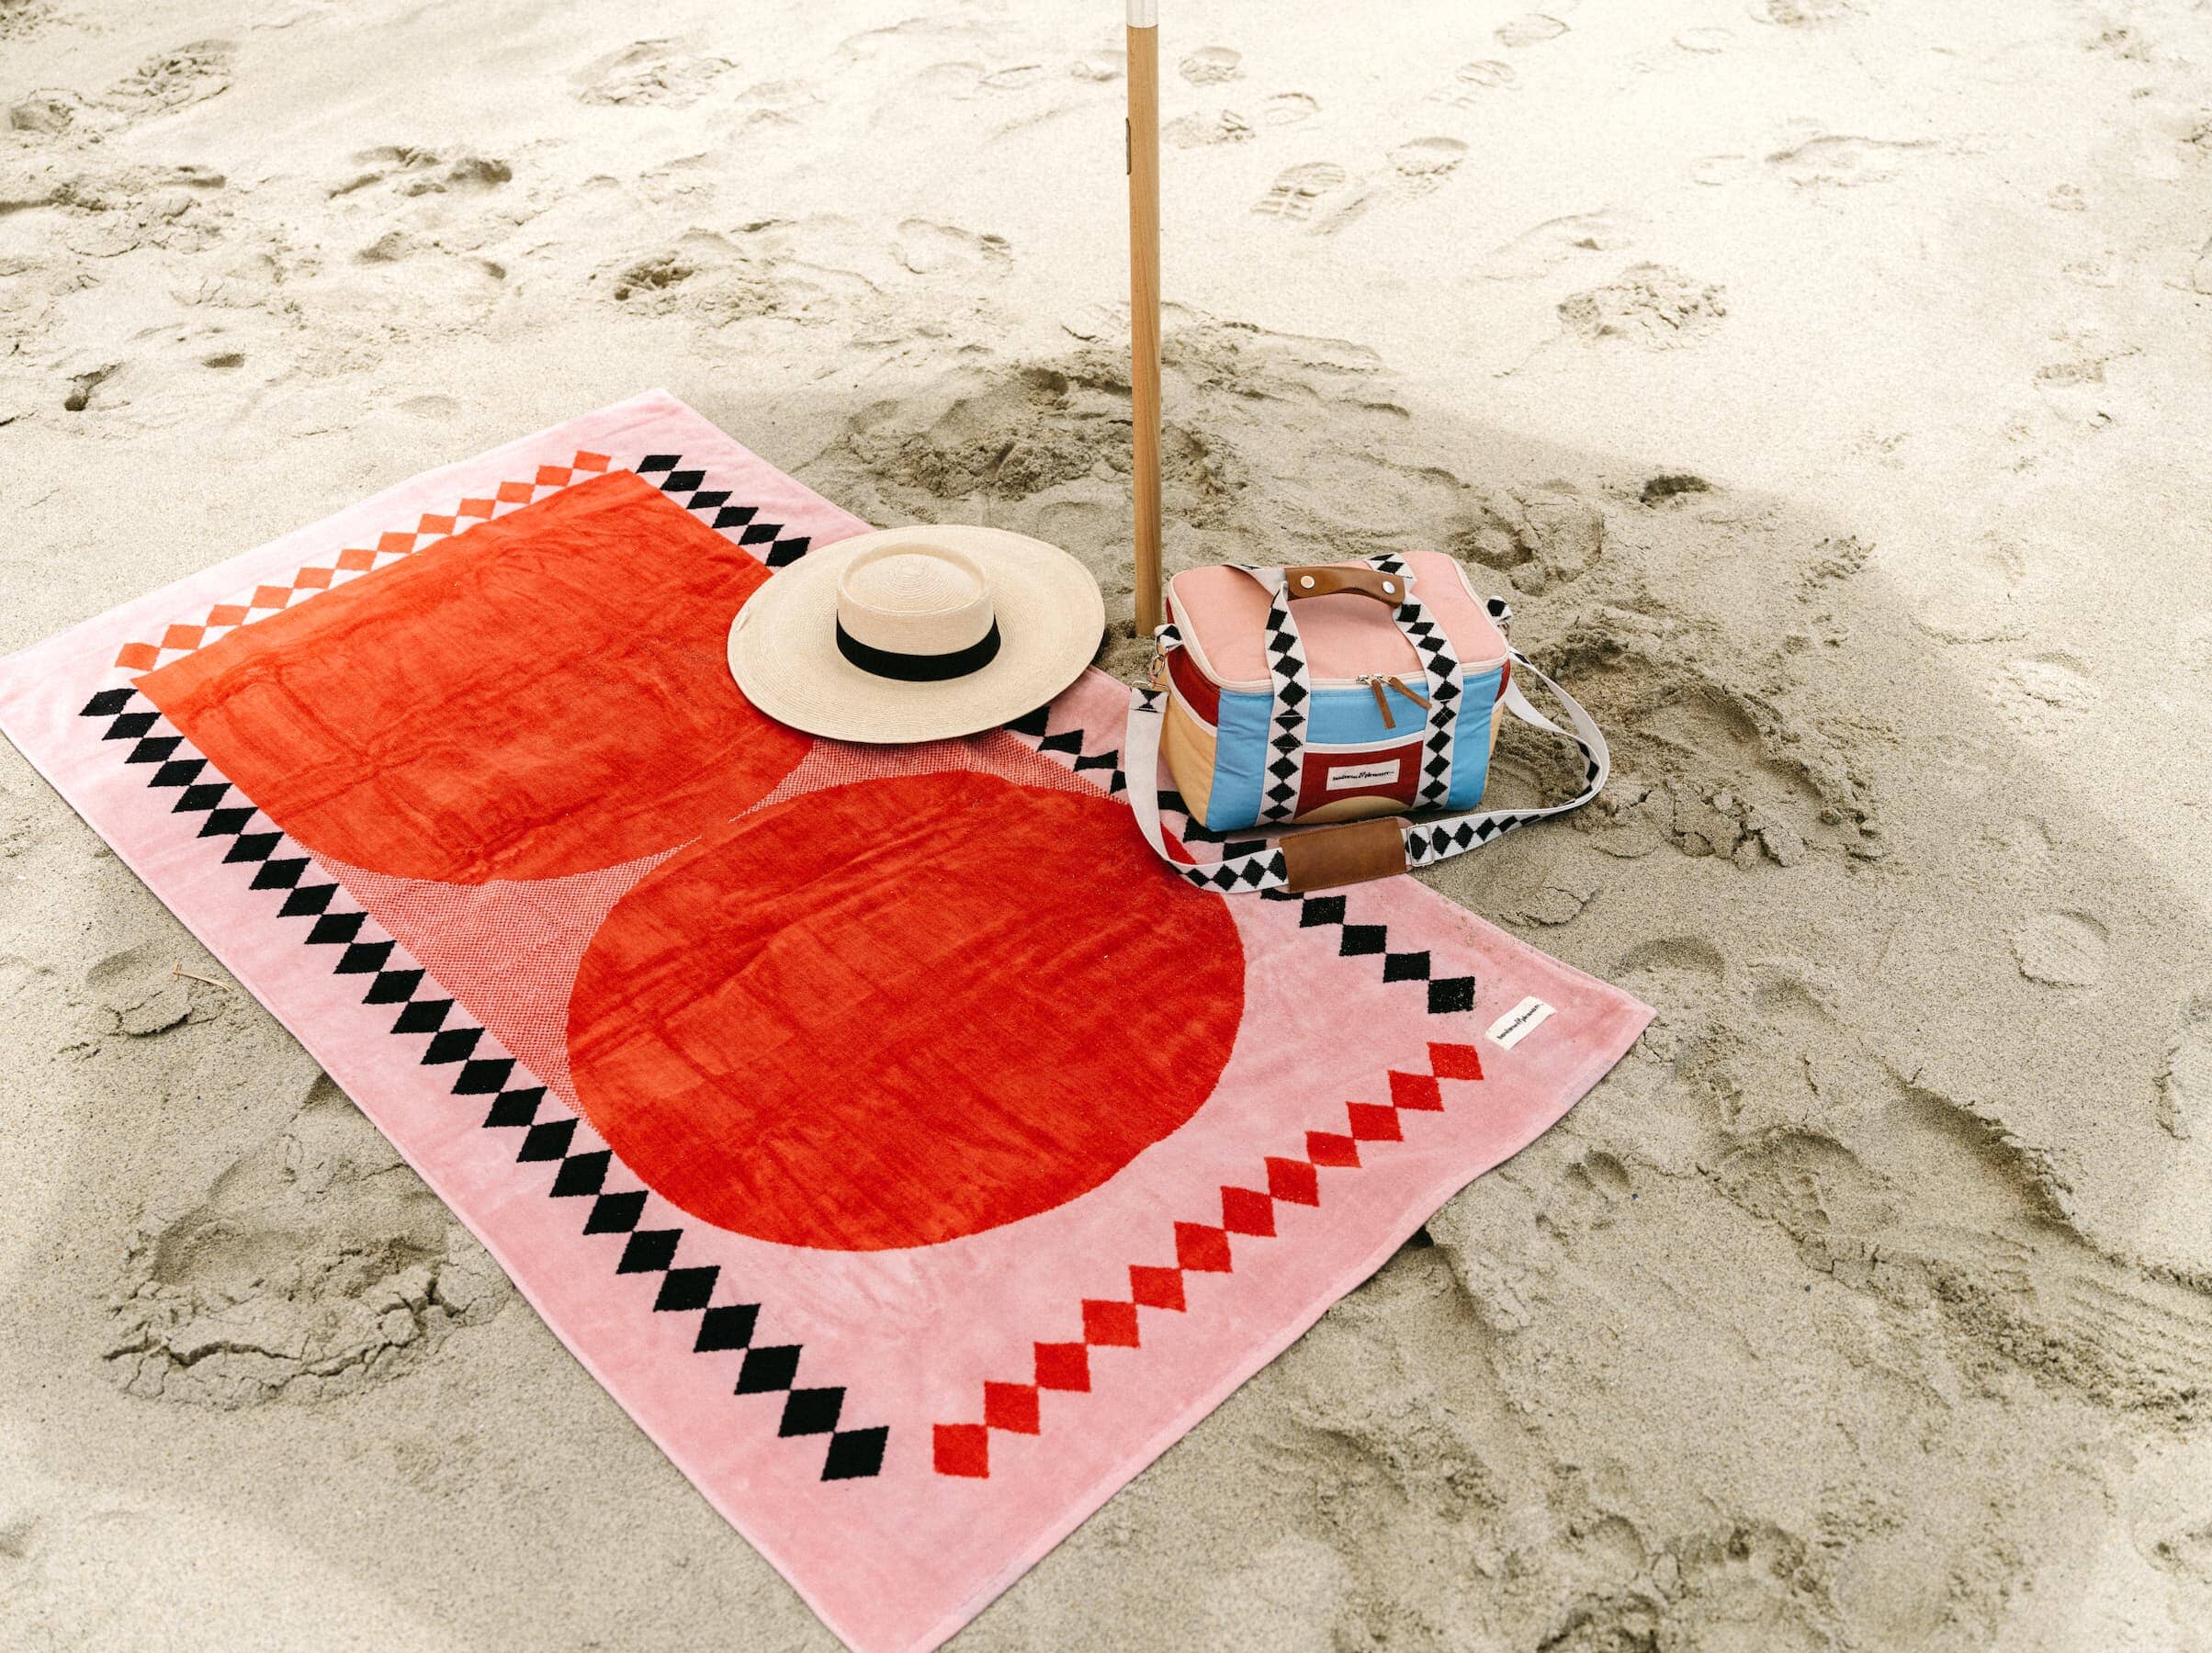 pink diamond cooler and towel on the beach